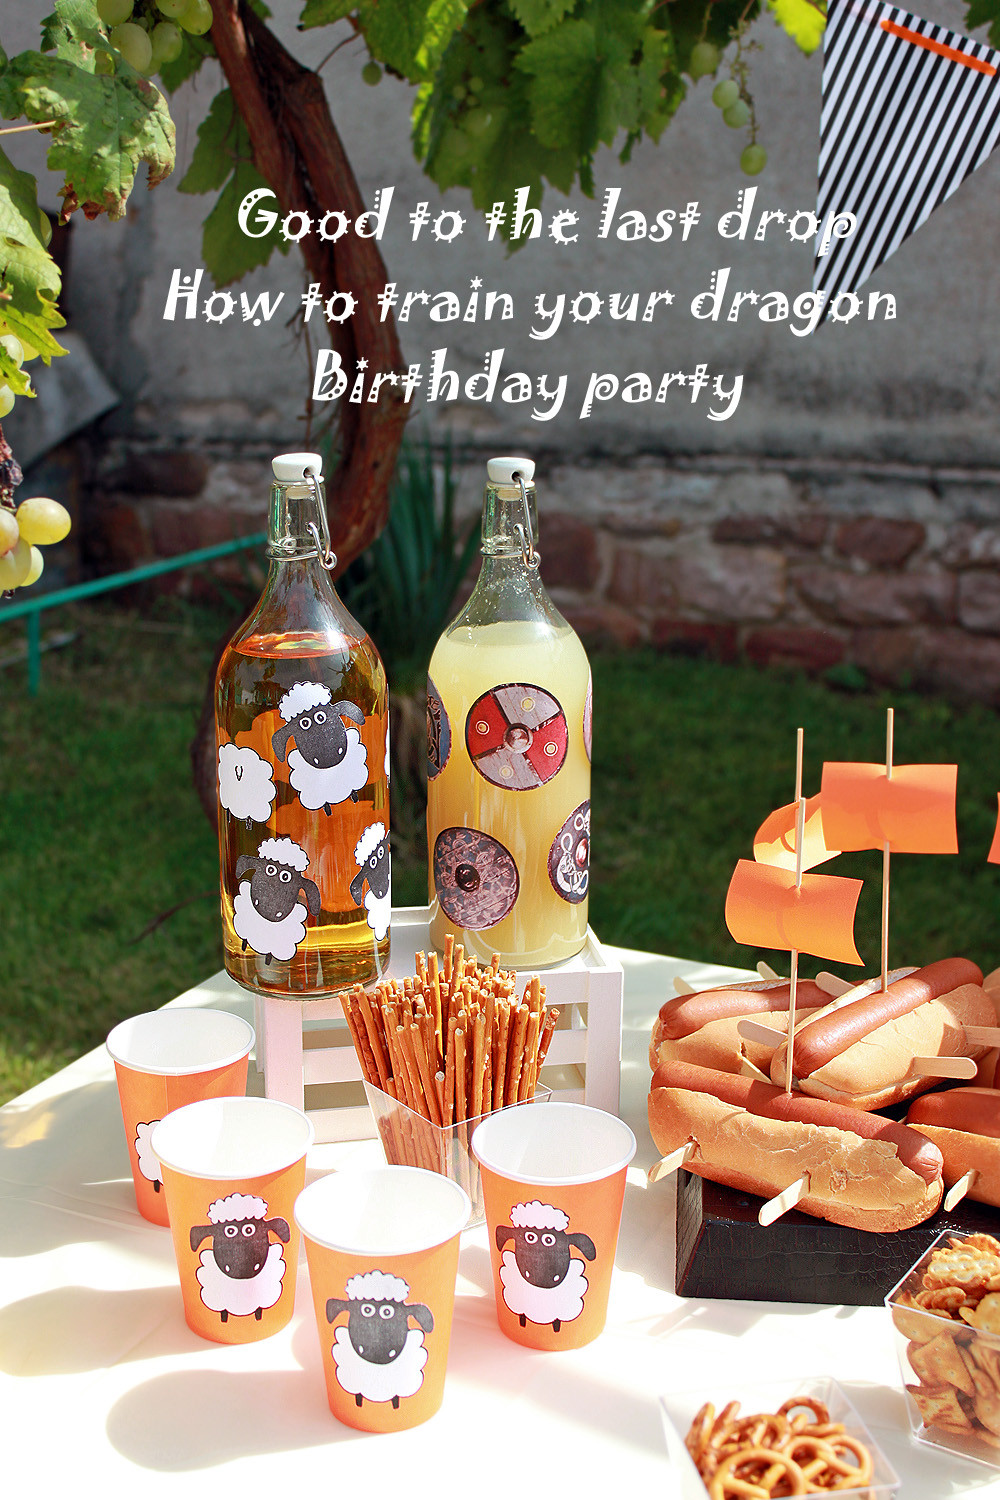 How To Train Your Dragon Birthday Party
 How to Train Your Dragon Birthday Party – Good to the last